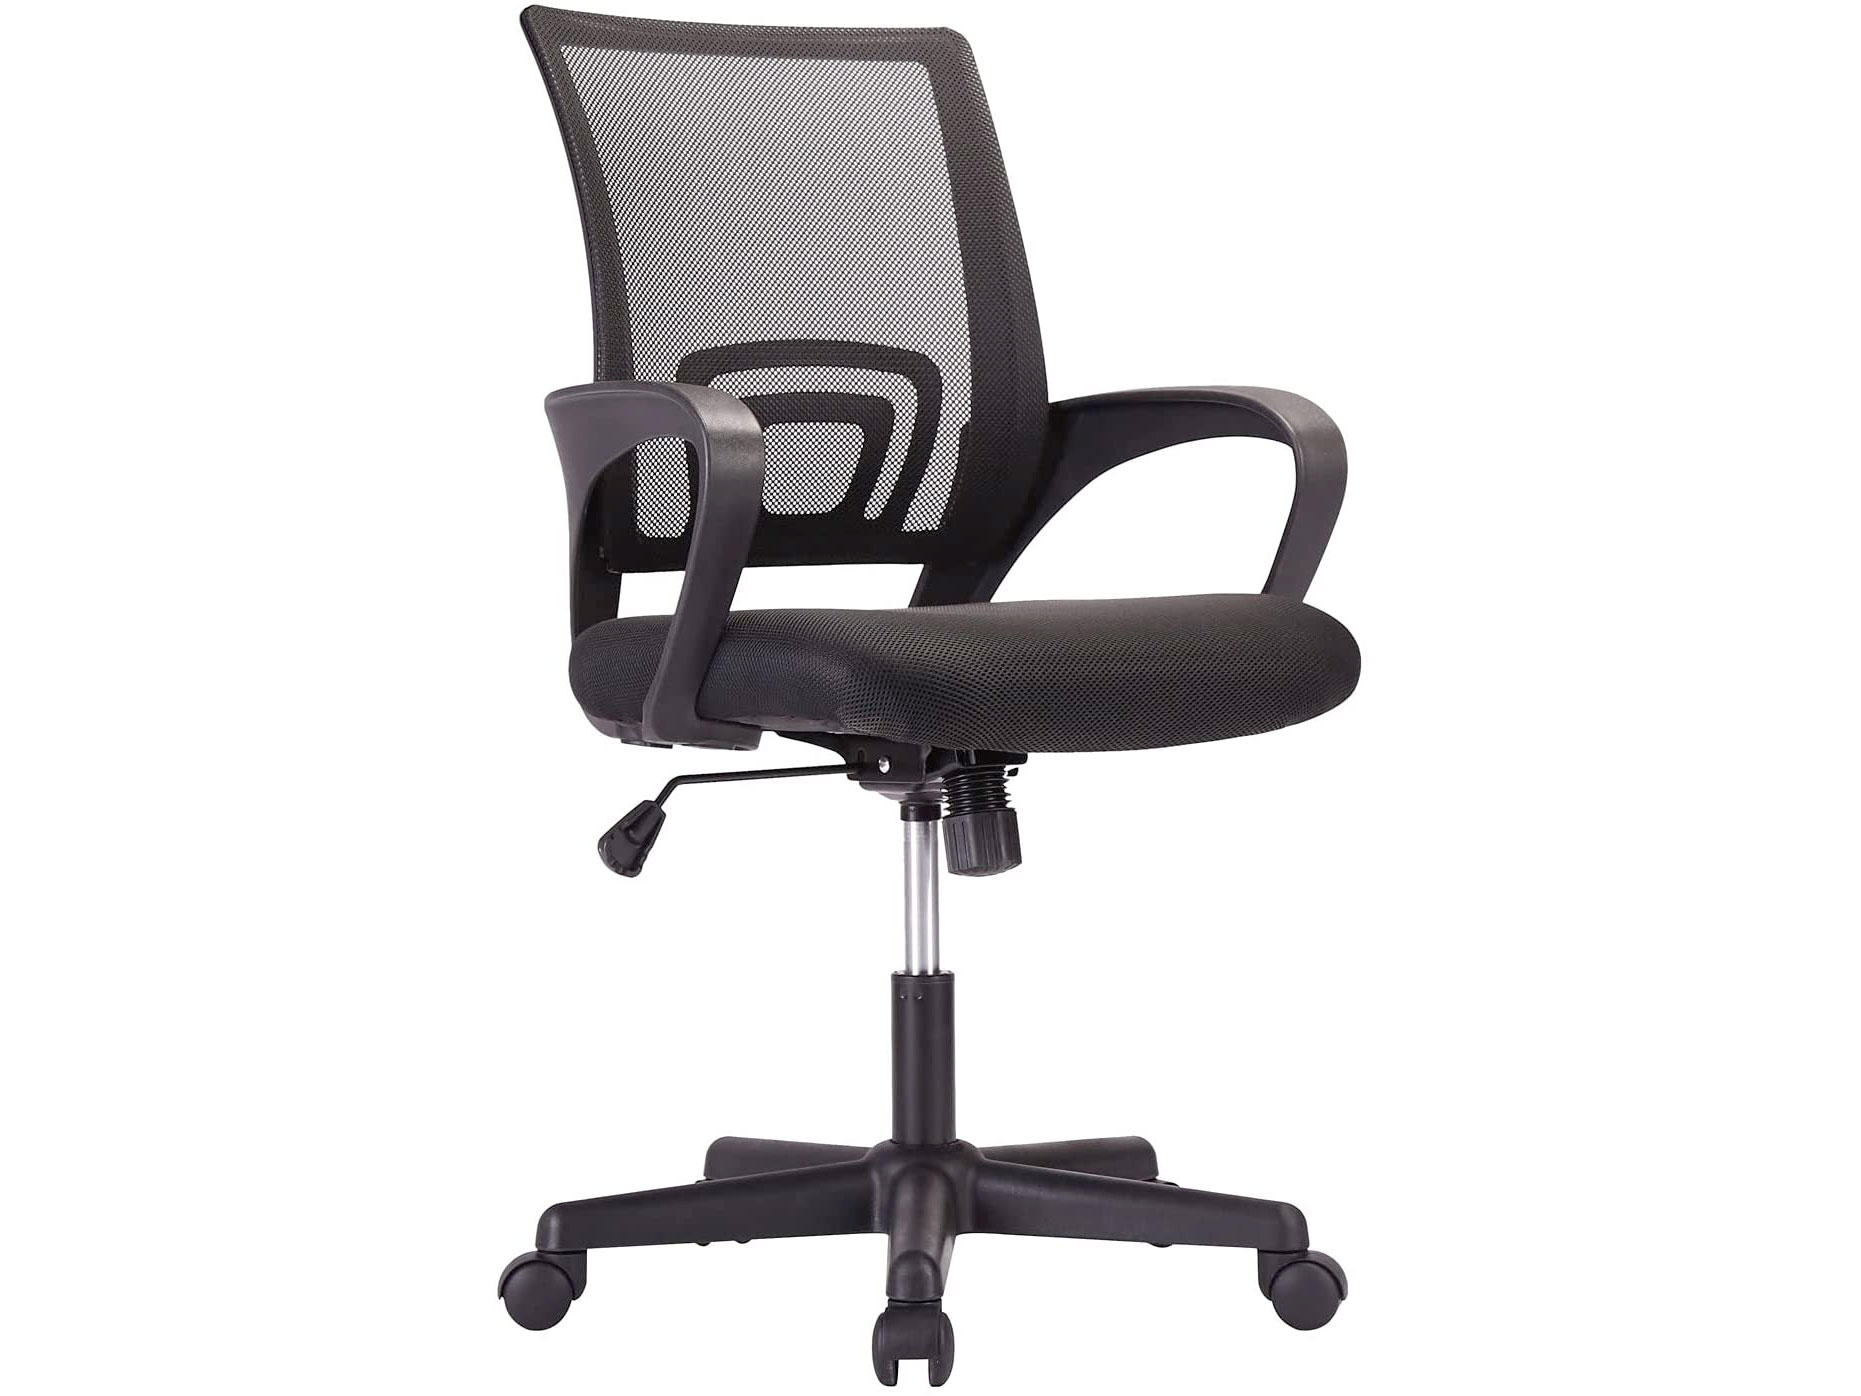 Amazon：Home Office Chair with Lumbar Support只賣$99.44